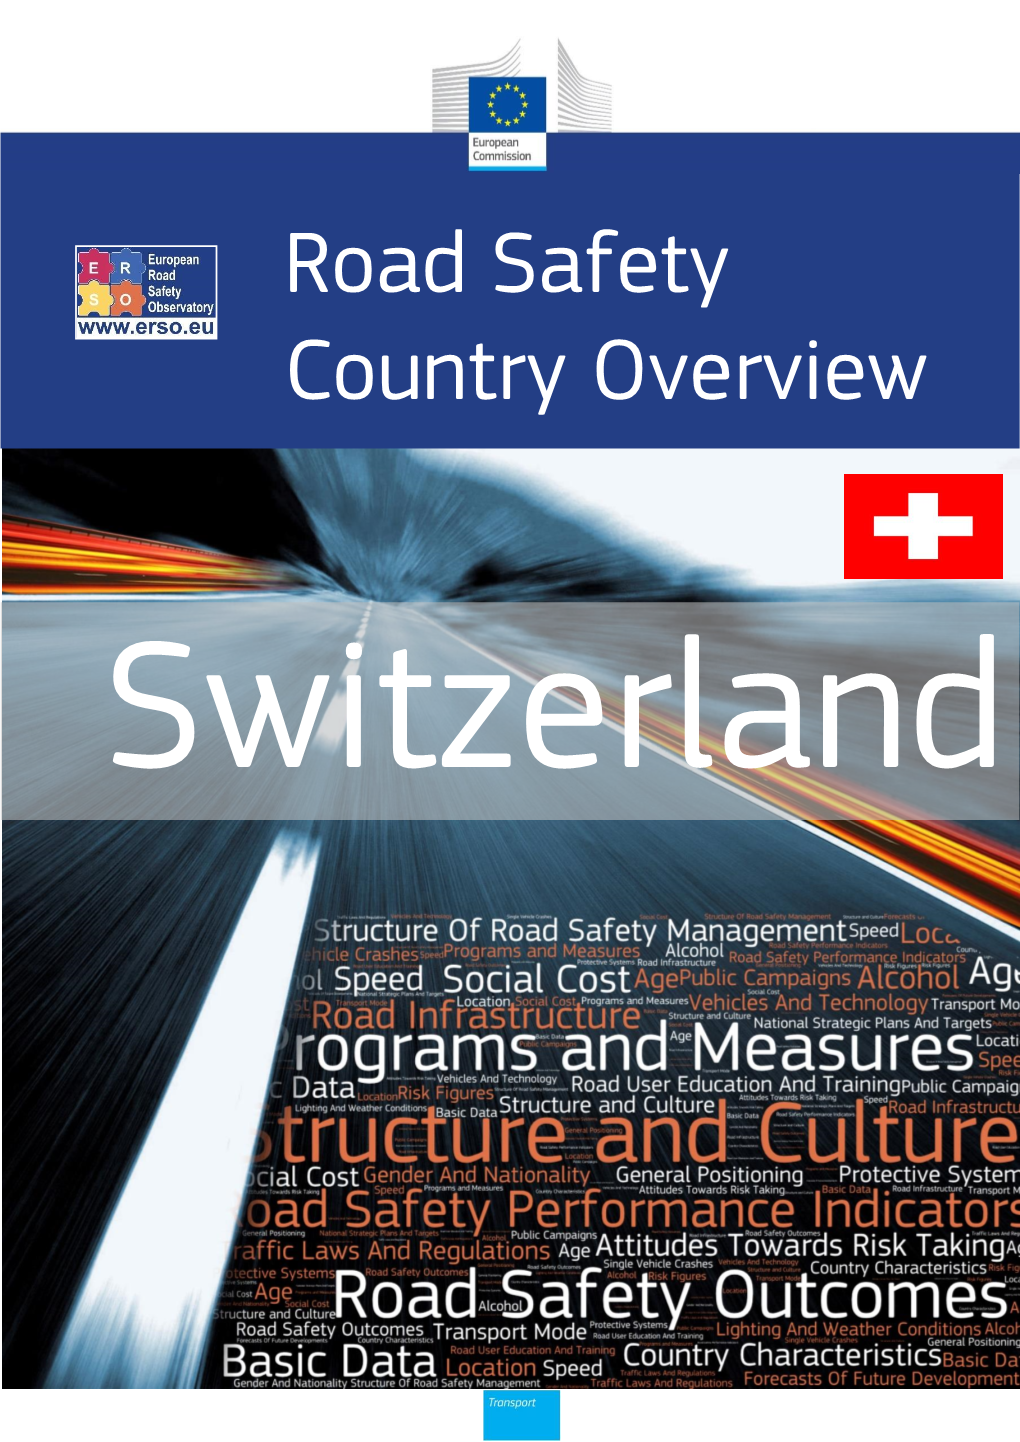 Road Safety Country Overview - SWITZERLAND